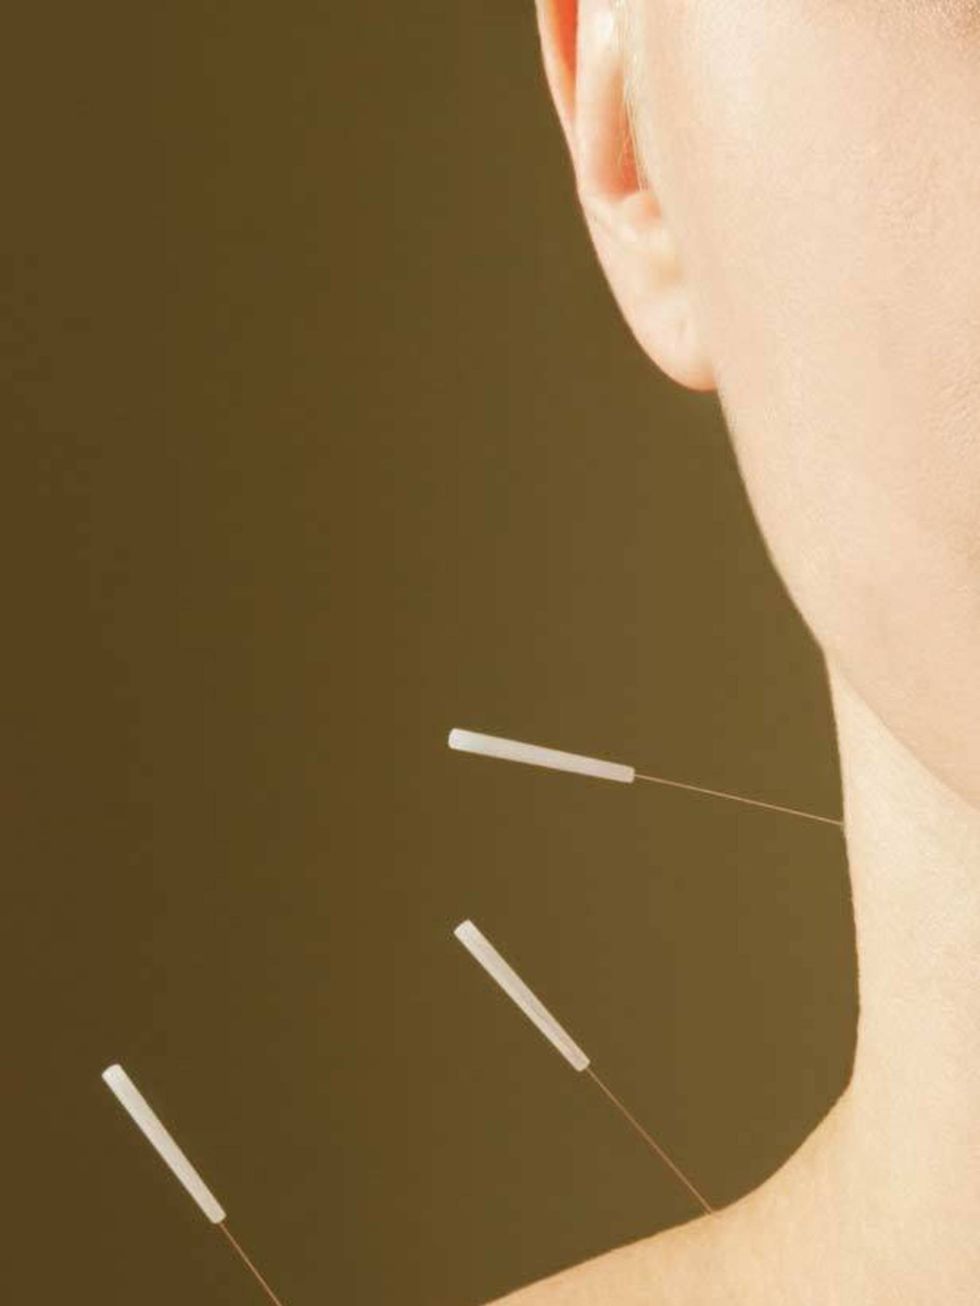 <p><strong>Acupuncture </strong></p><p>Acupuncture is a form of Chinese medicine that stimulates points on the body that are associated with the flow of energy, also know as qi (pronounced chee), with hair thin needles. It is believed that an imbalance 